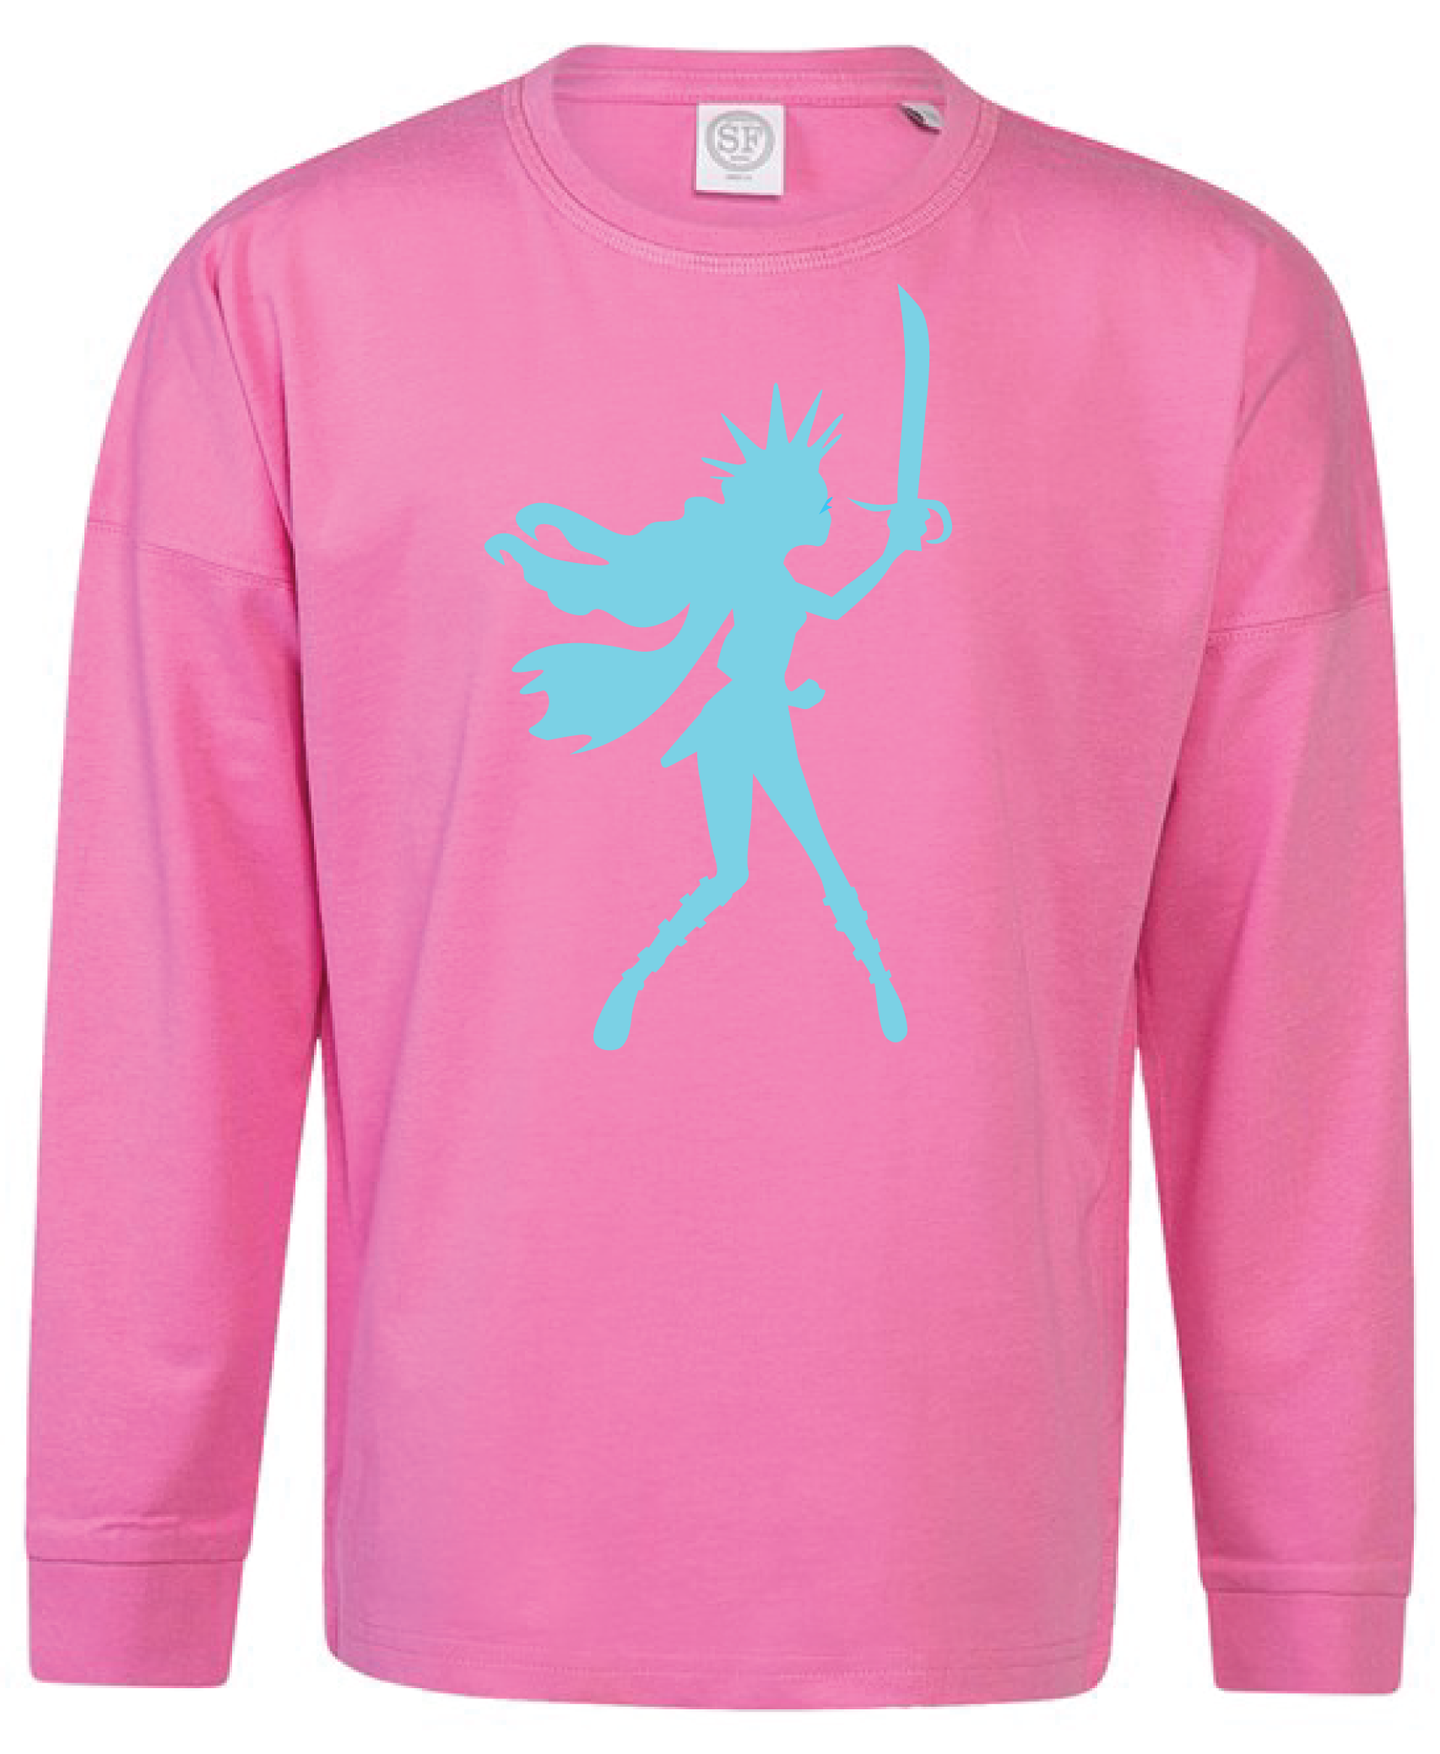 Girls Pink 100% Cotton long sleeve top with Blue Pirate Queen flock print.